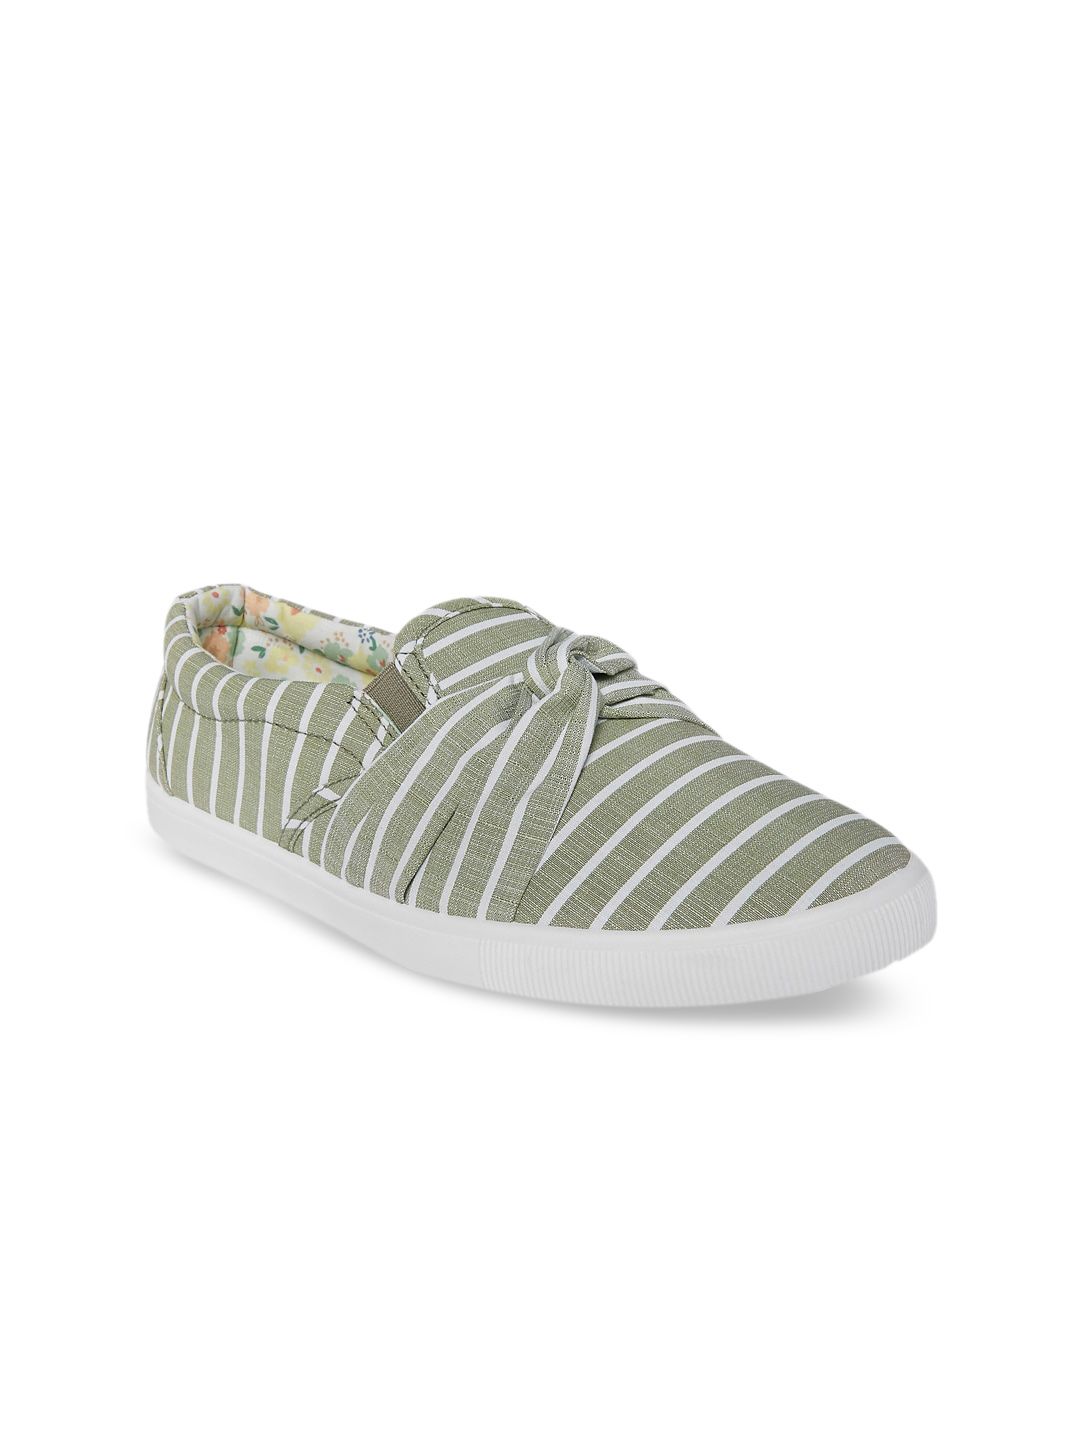 Forever Glam by Pantaloons Women Green Striped Slip-On Sneakers Price in India